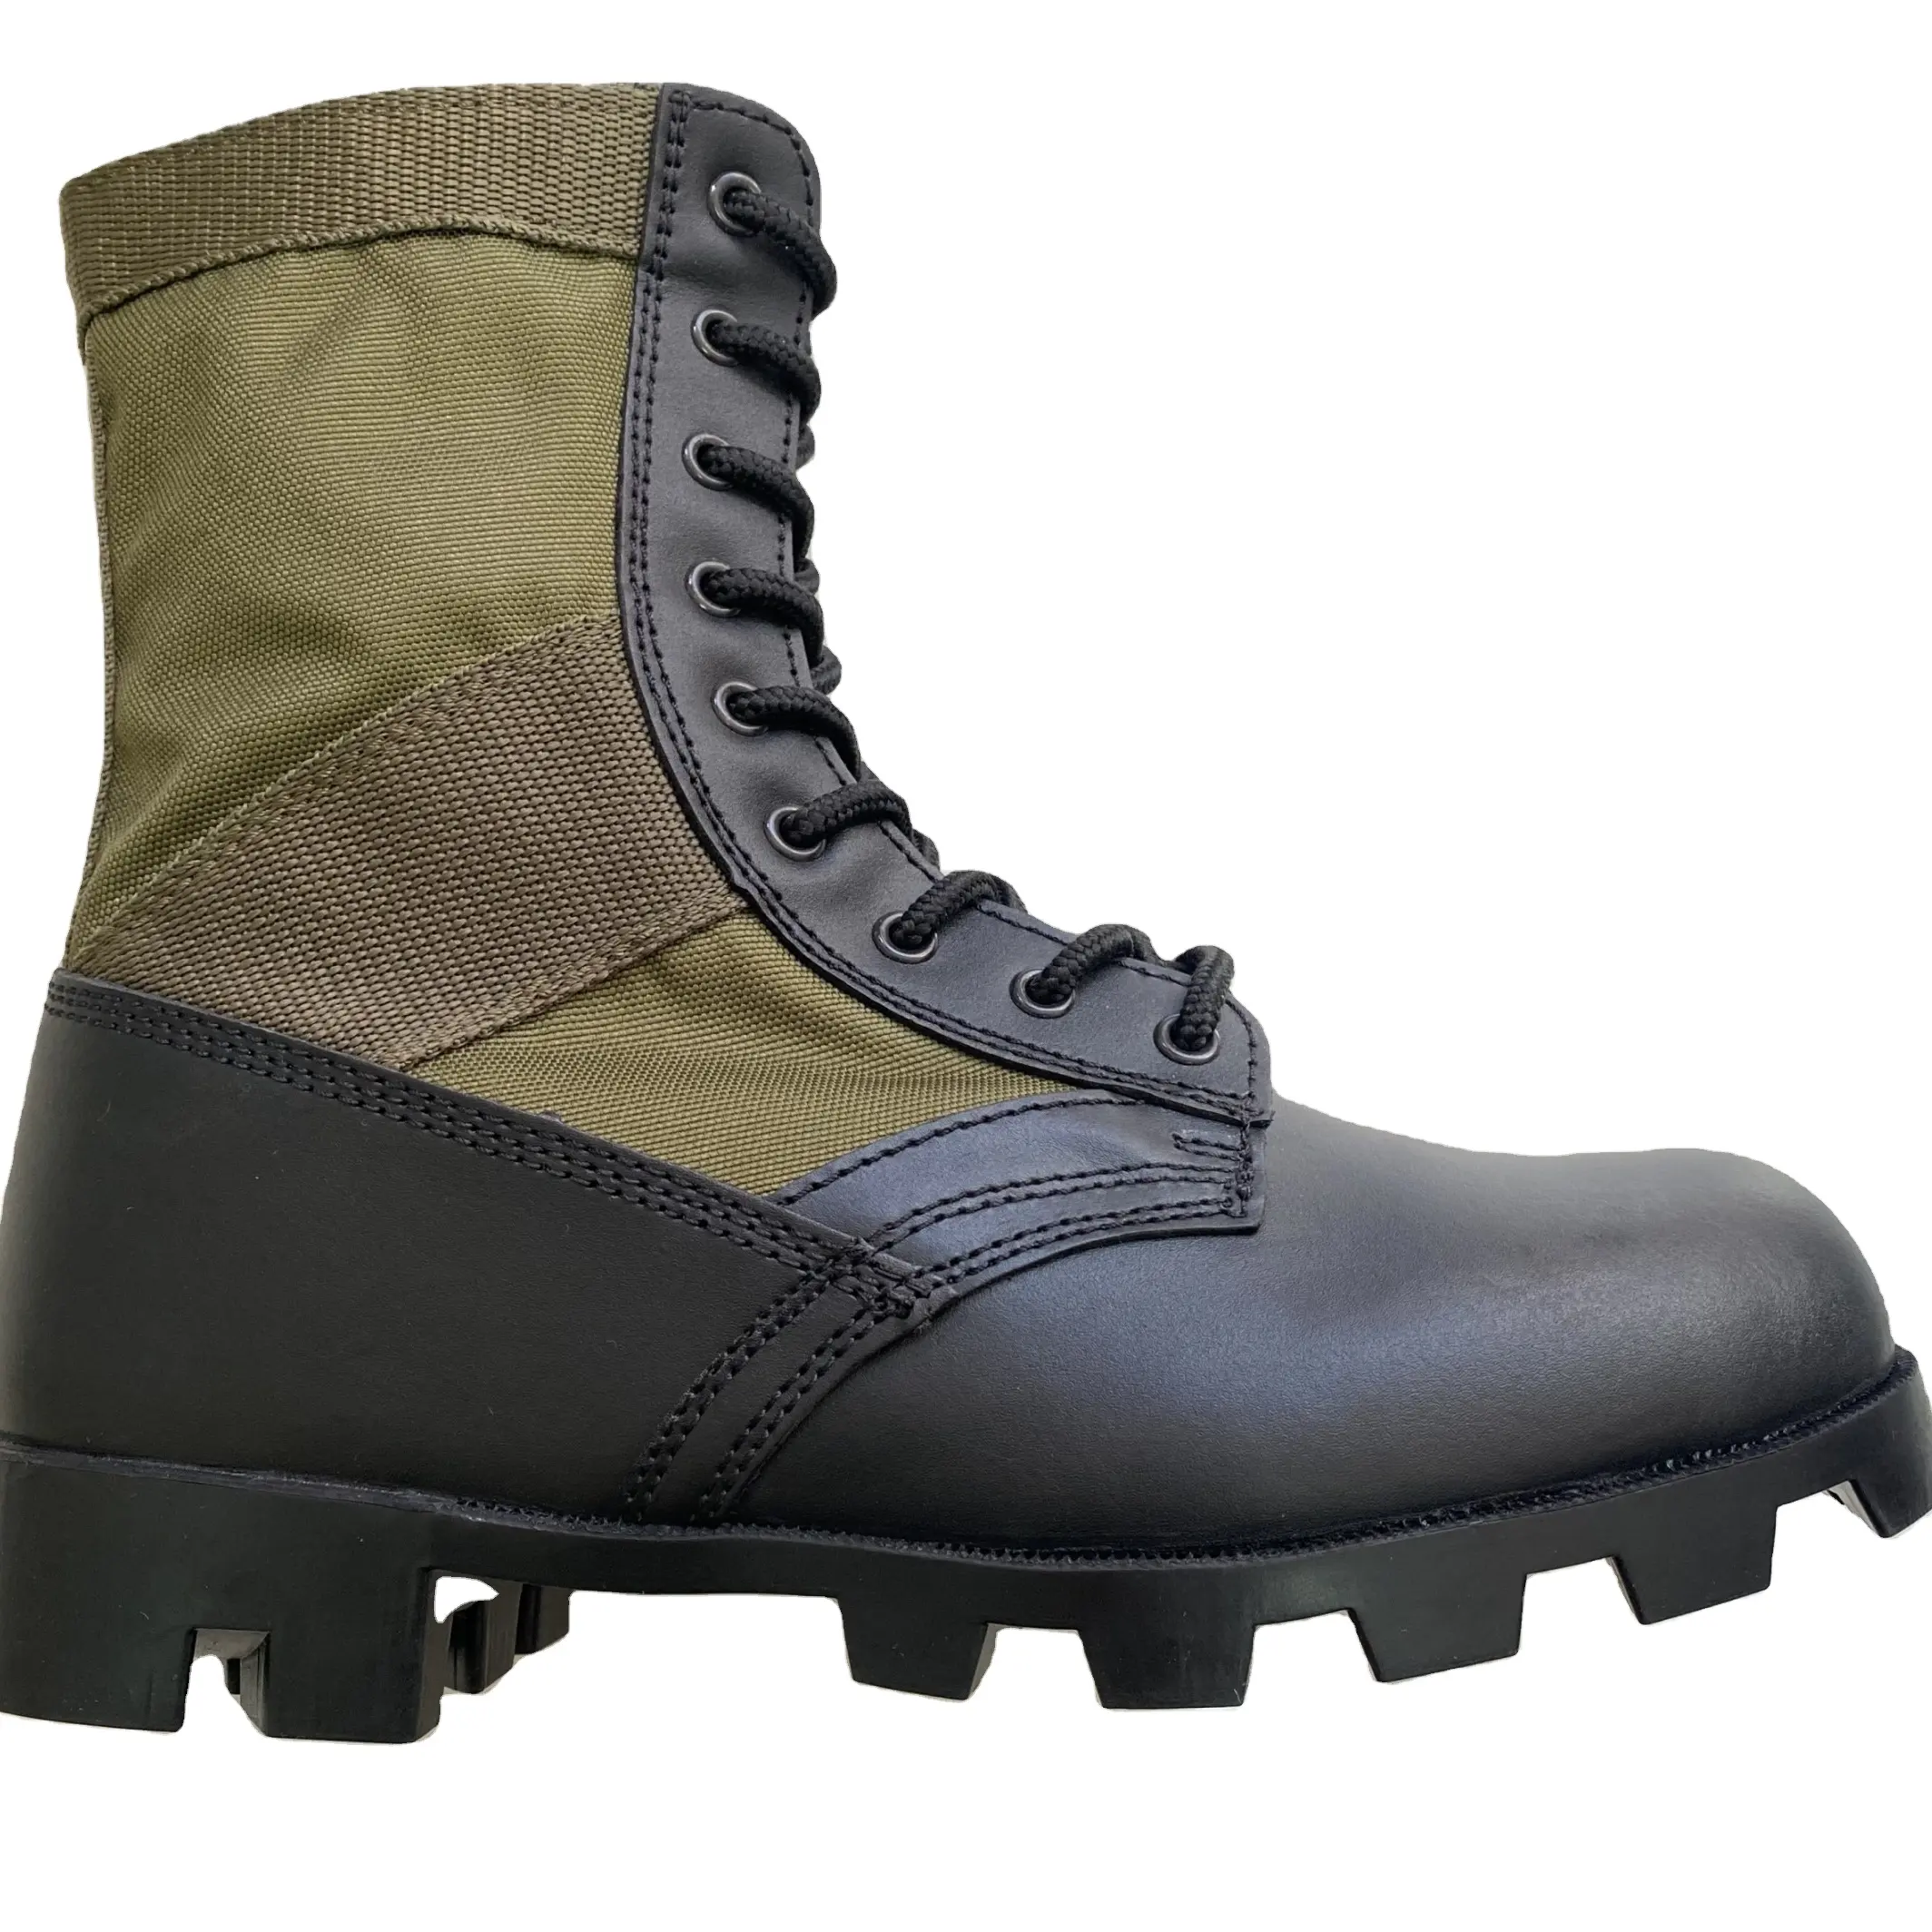 strong quality genuine leather with Double pu coated oxford fabric upper work boots